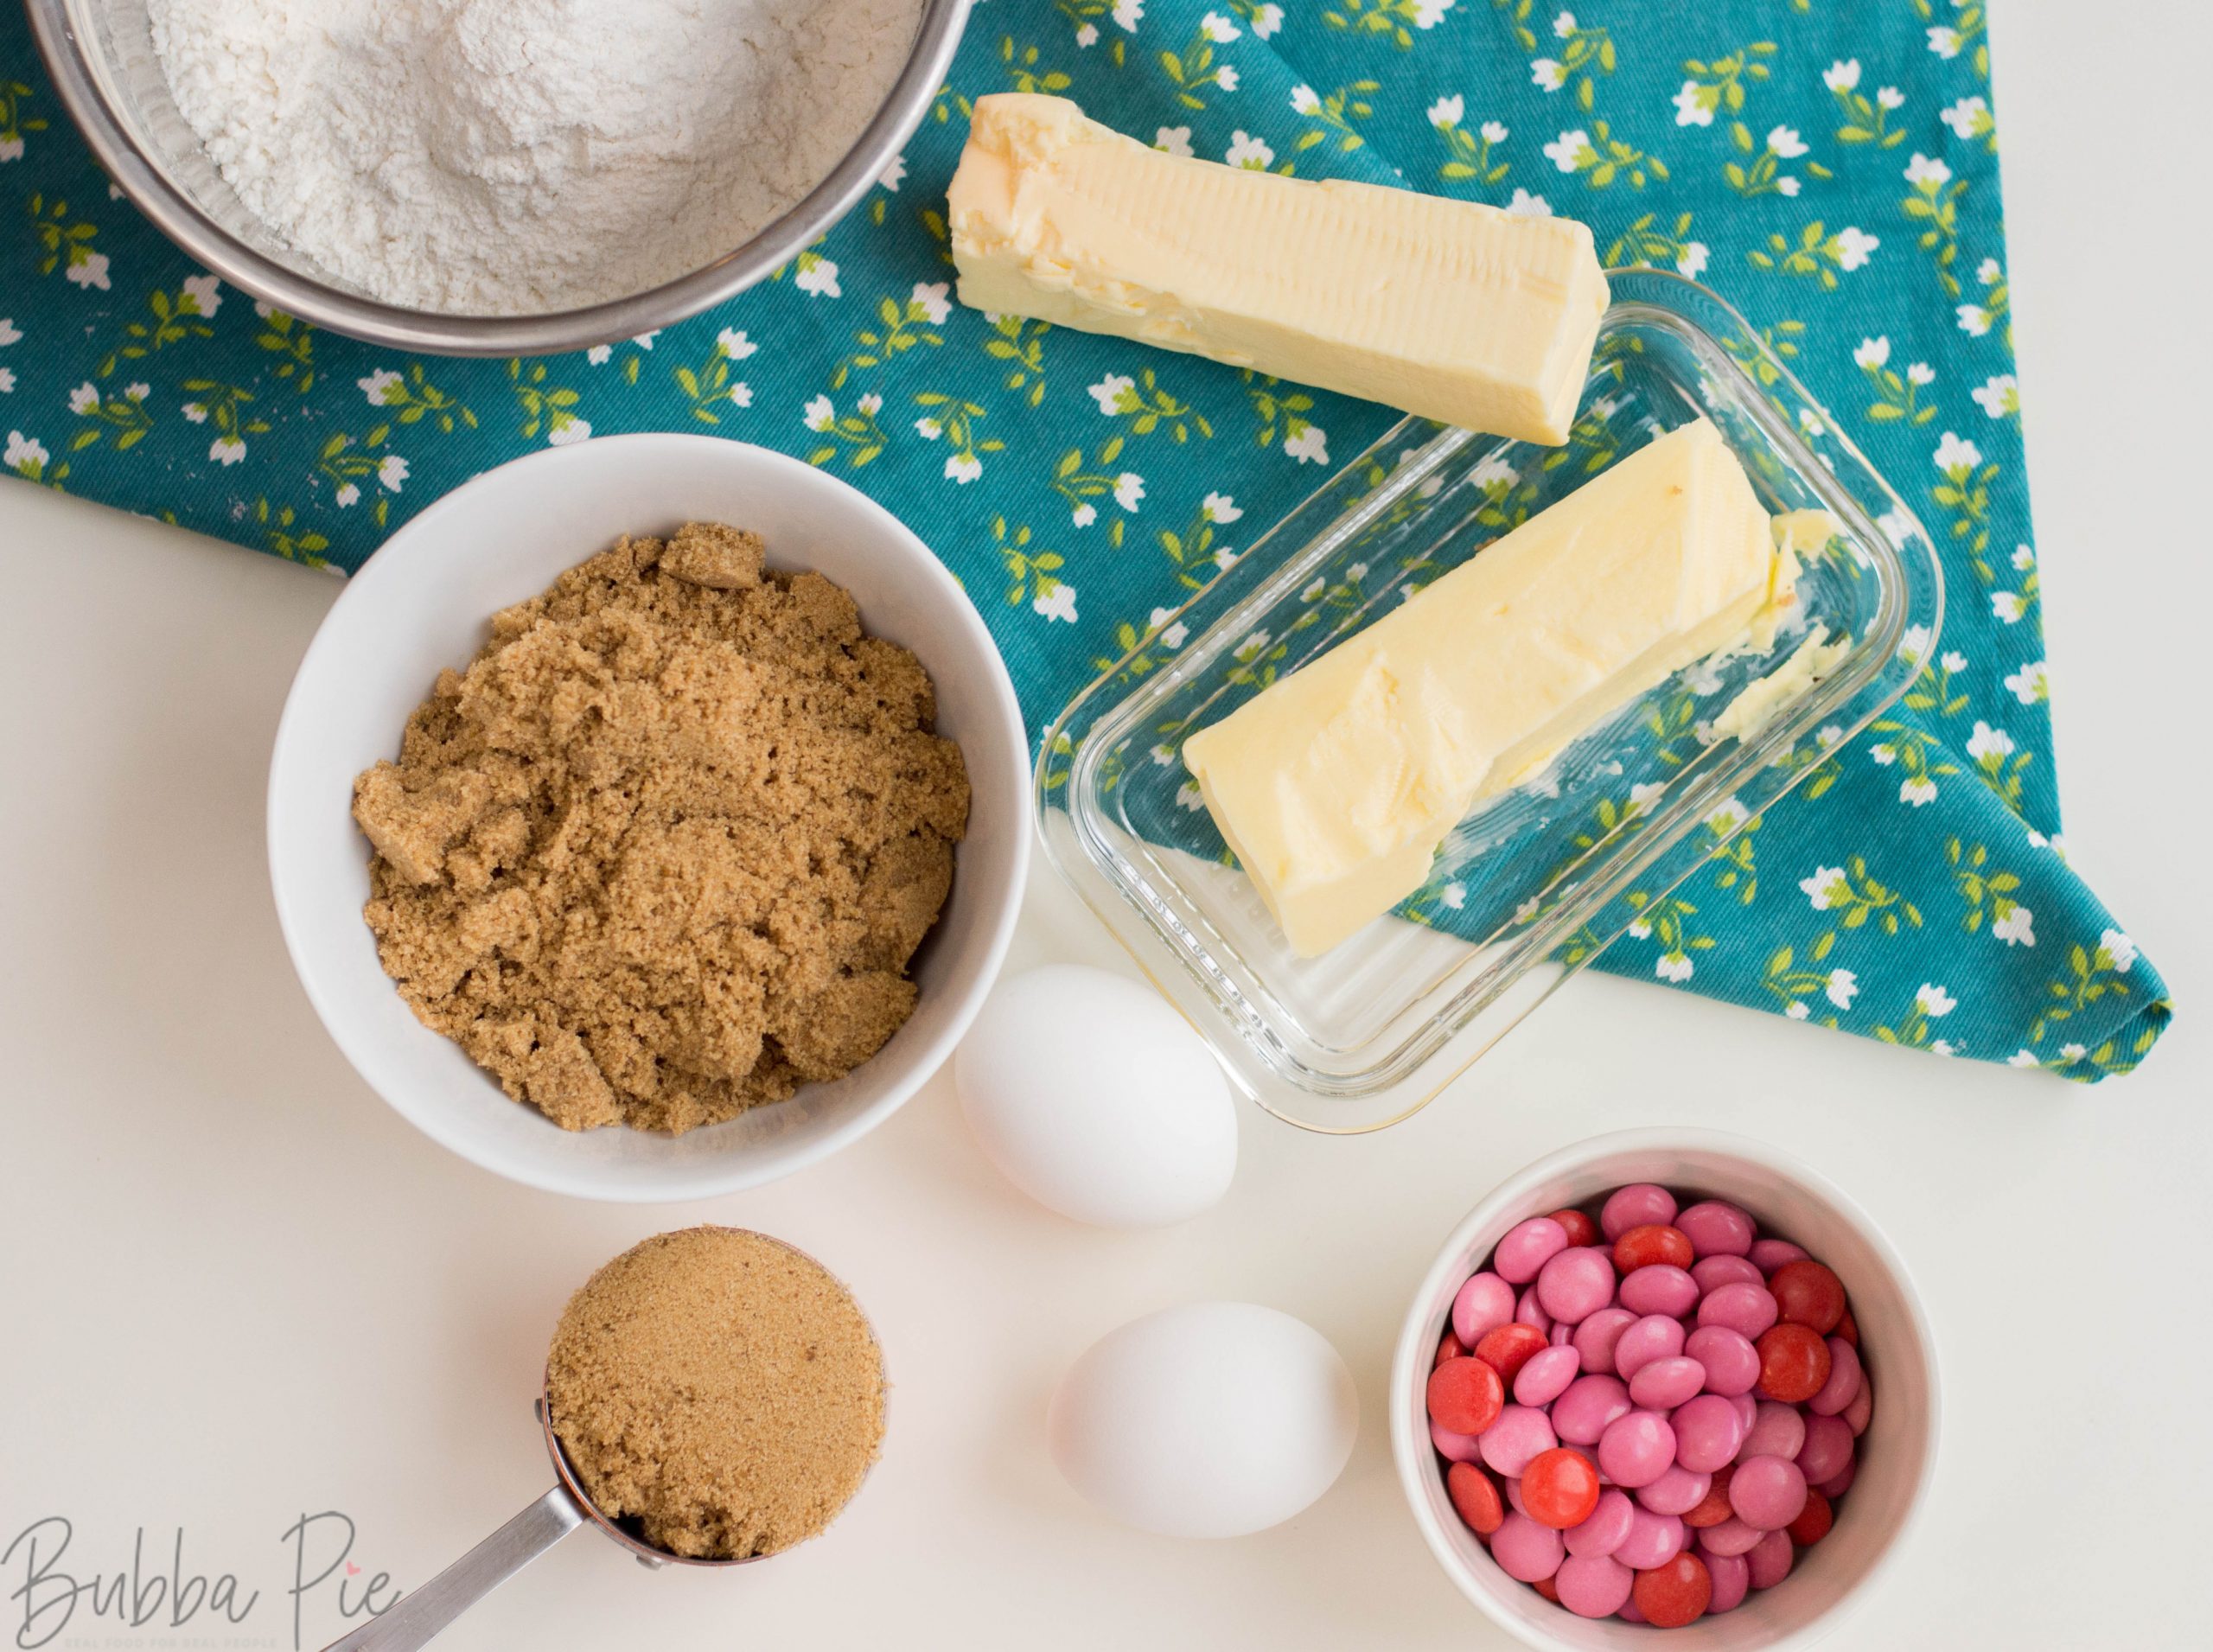 Valentine's Day Brown Sugar Blondie ingredients include butter, sugar, eggs, flour and m&ms